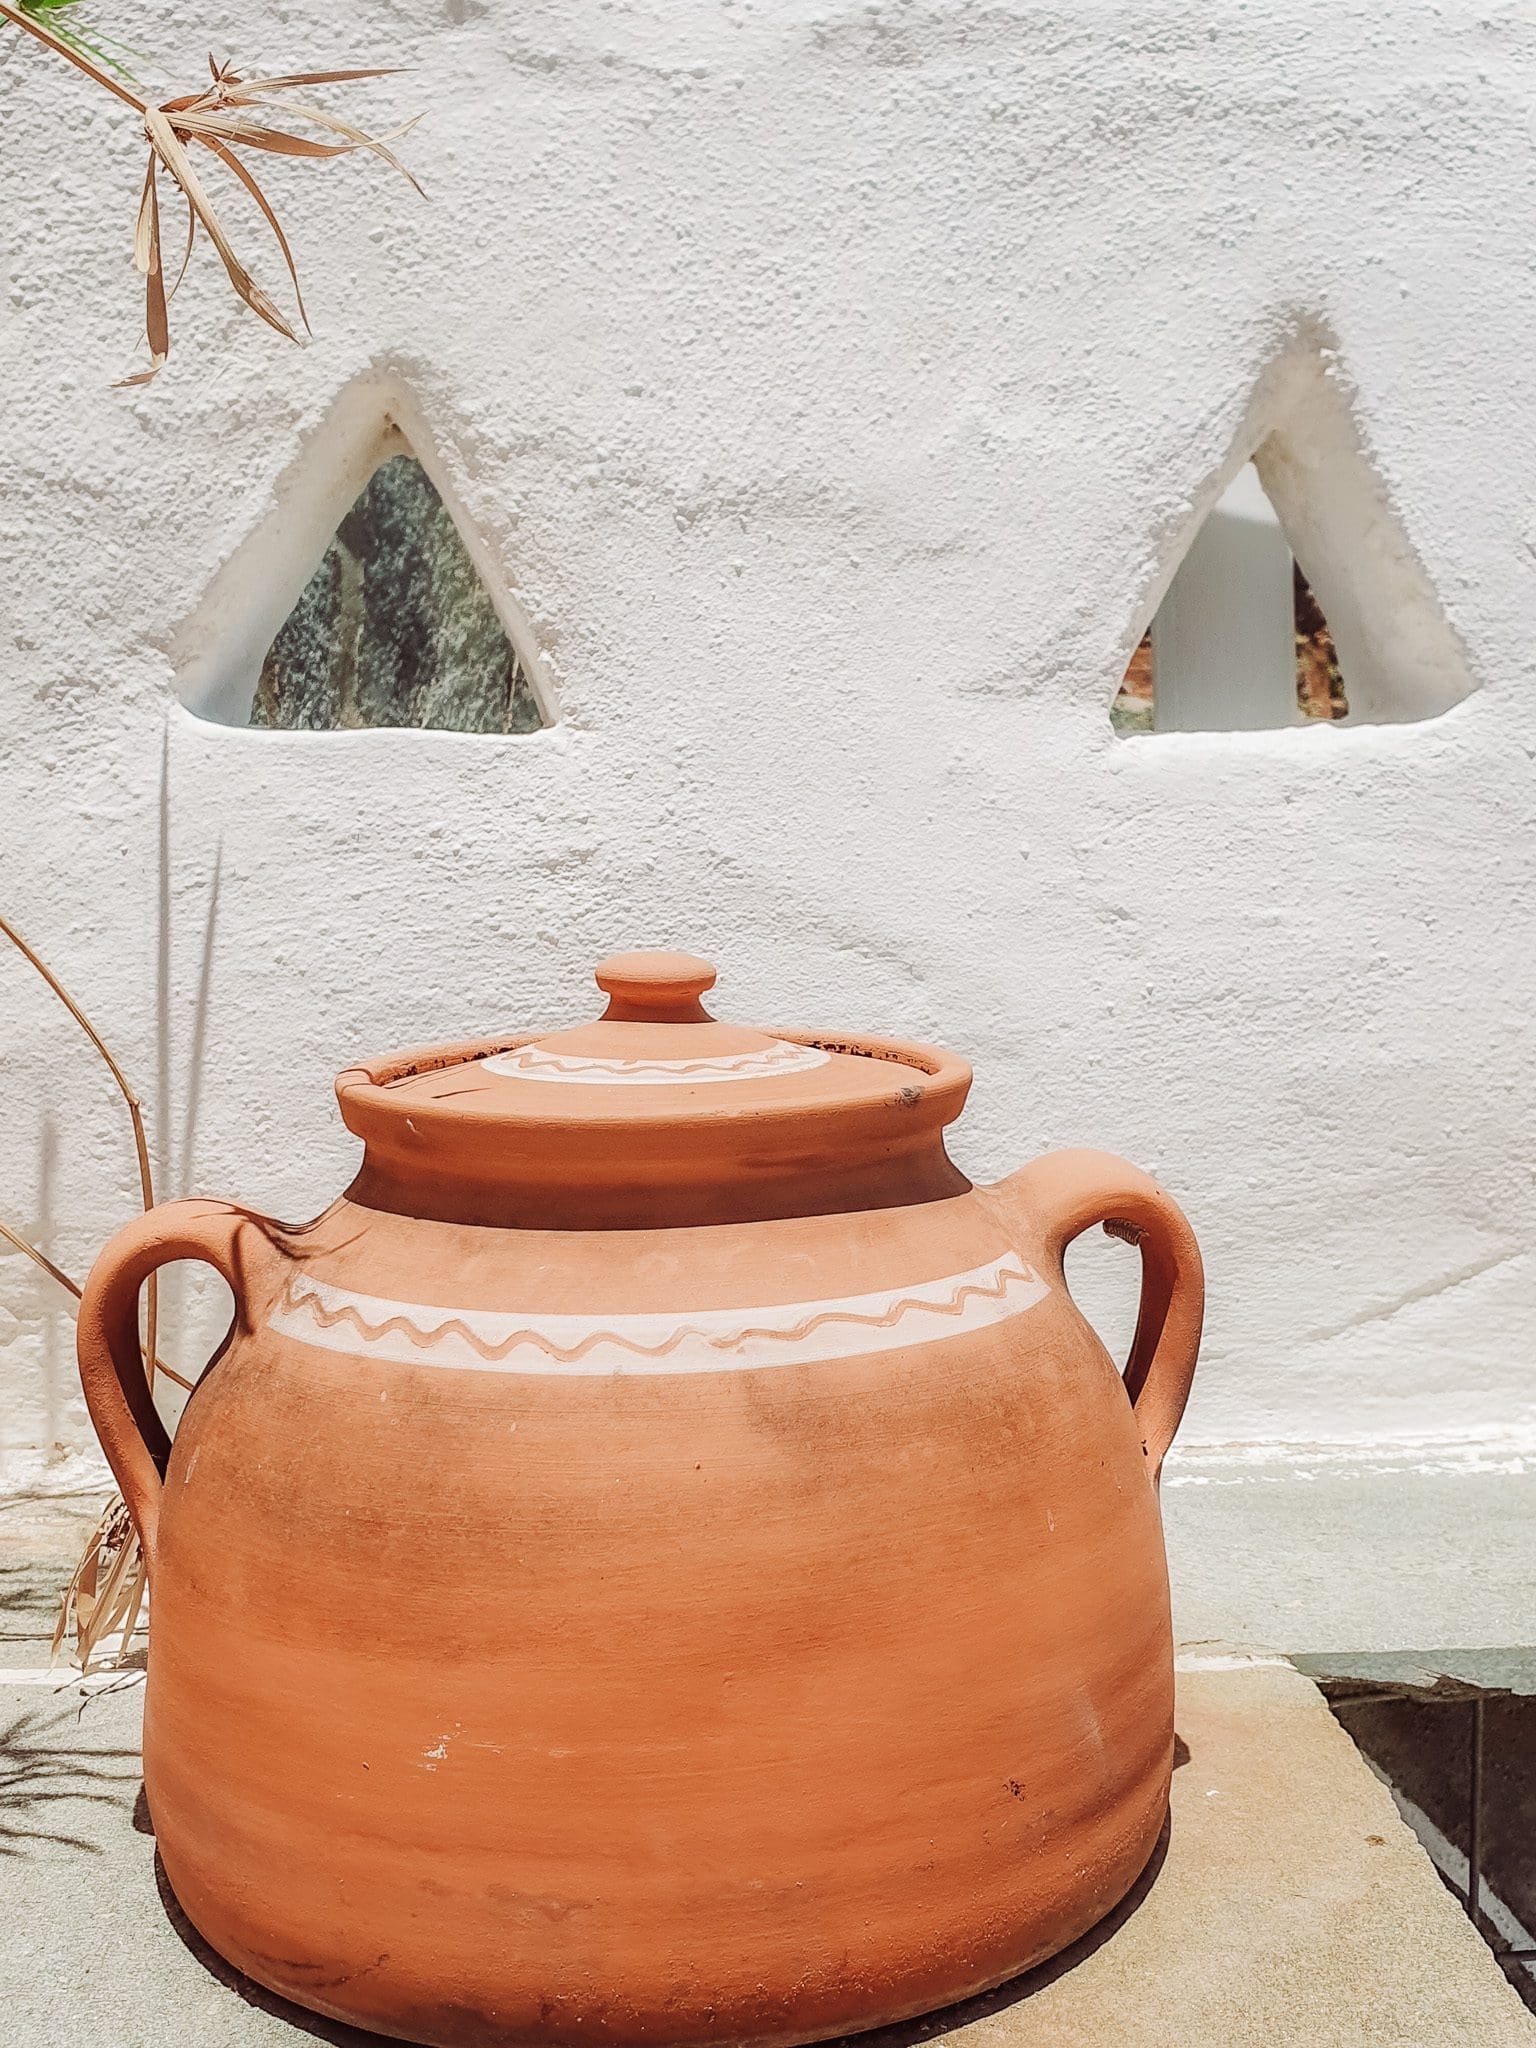 pottery at Sifnos